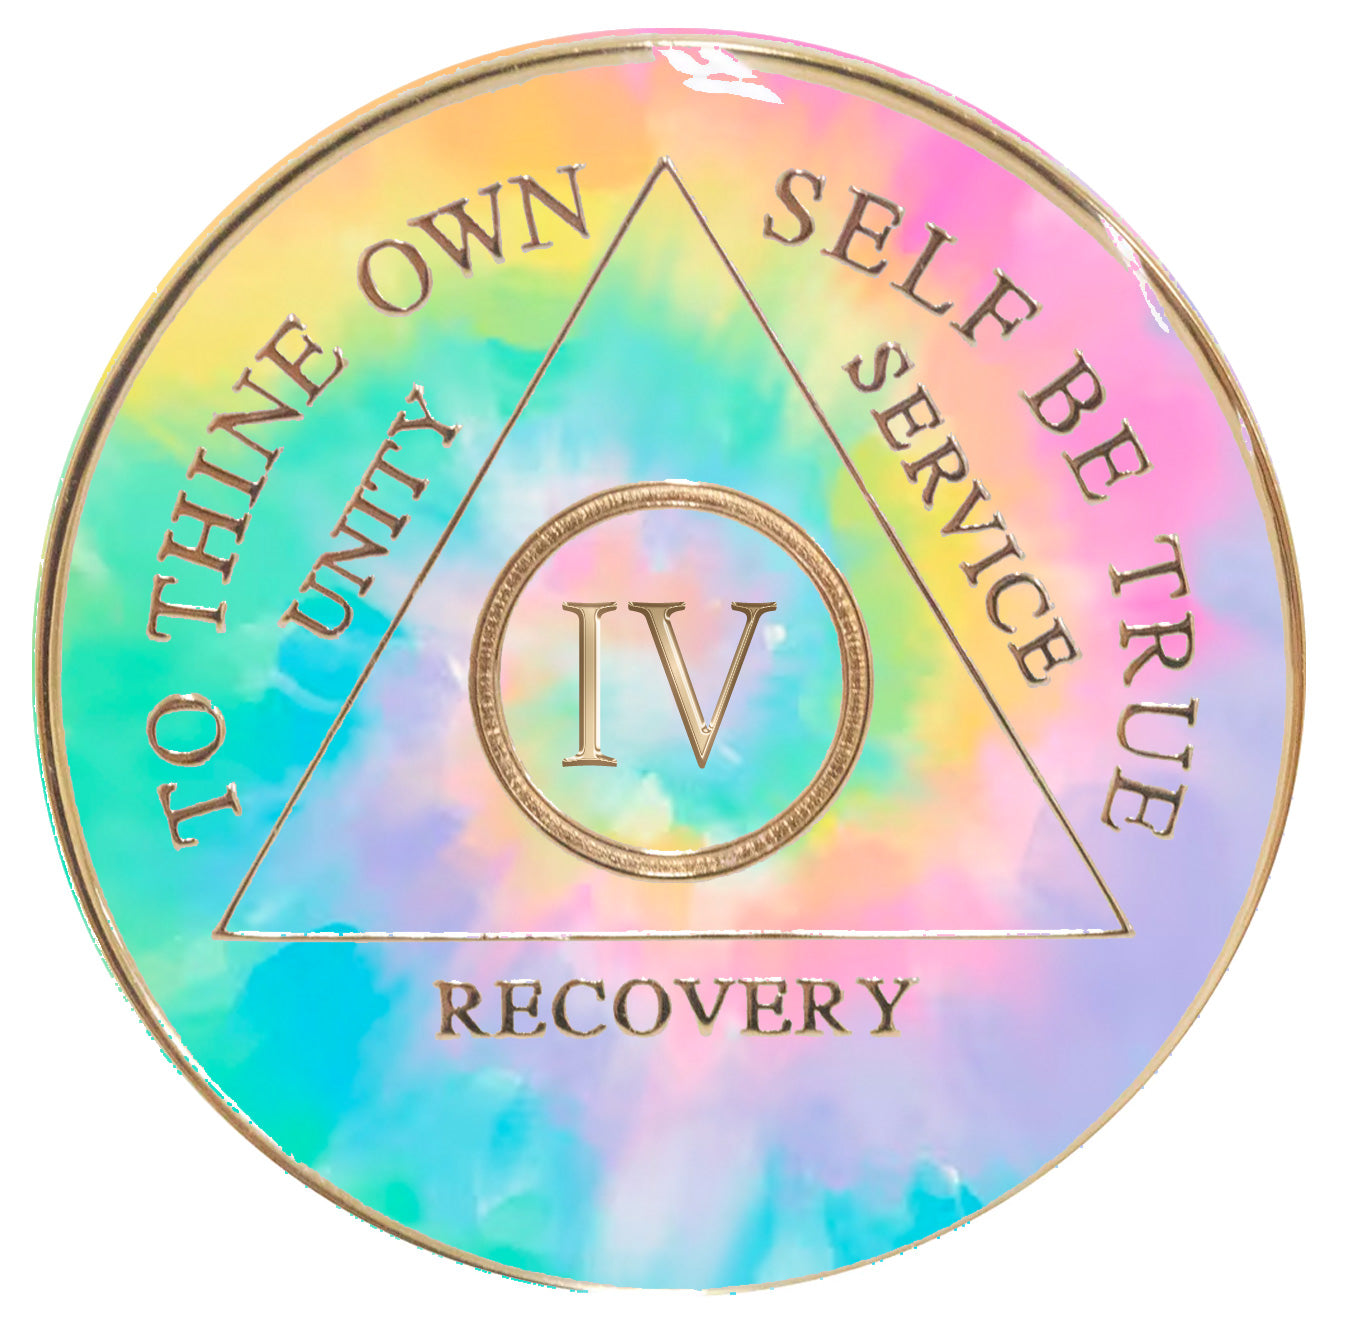 4 year AA psychic-delic change medallion is tie-dye in soft pink, yellow, purple, and blues with the circle, triangle, roman numeral, unity, service, recovery, and to thine own self be true embossed in 14k gold, and the tie-dye representing change.